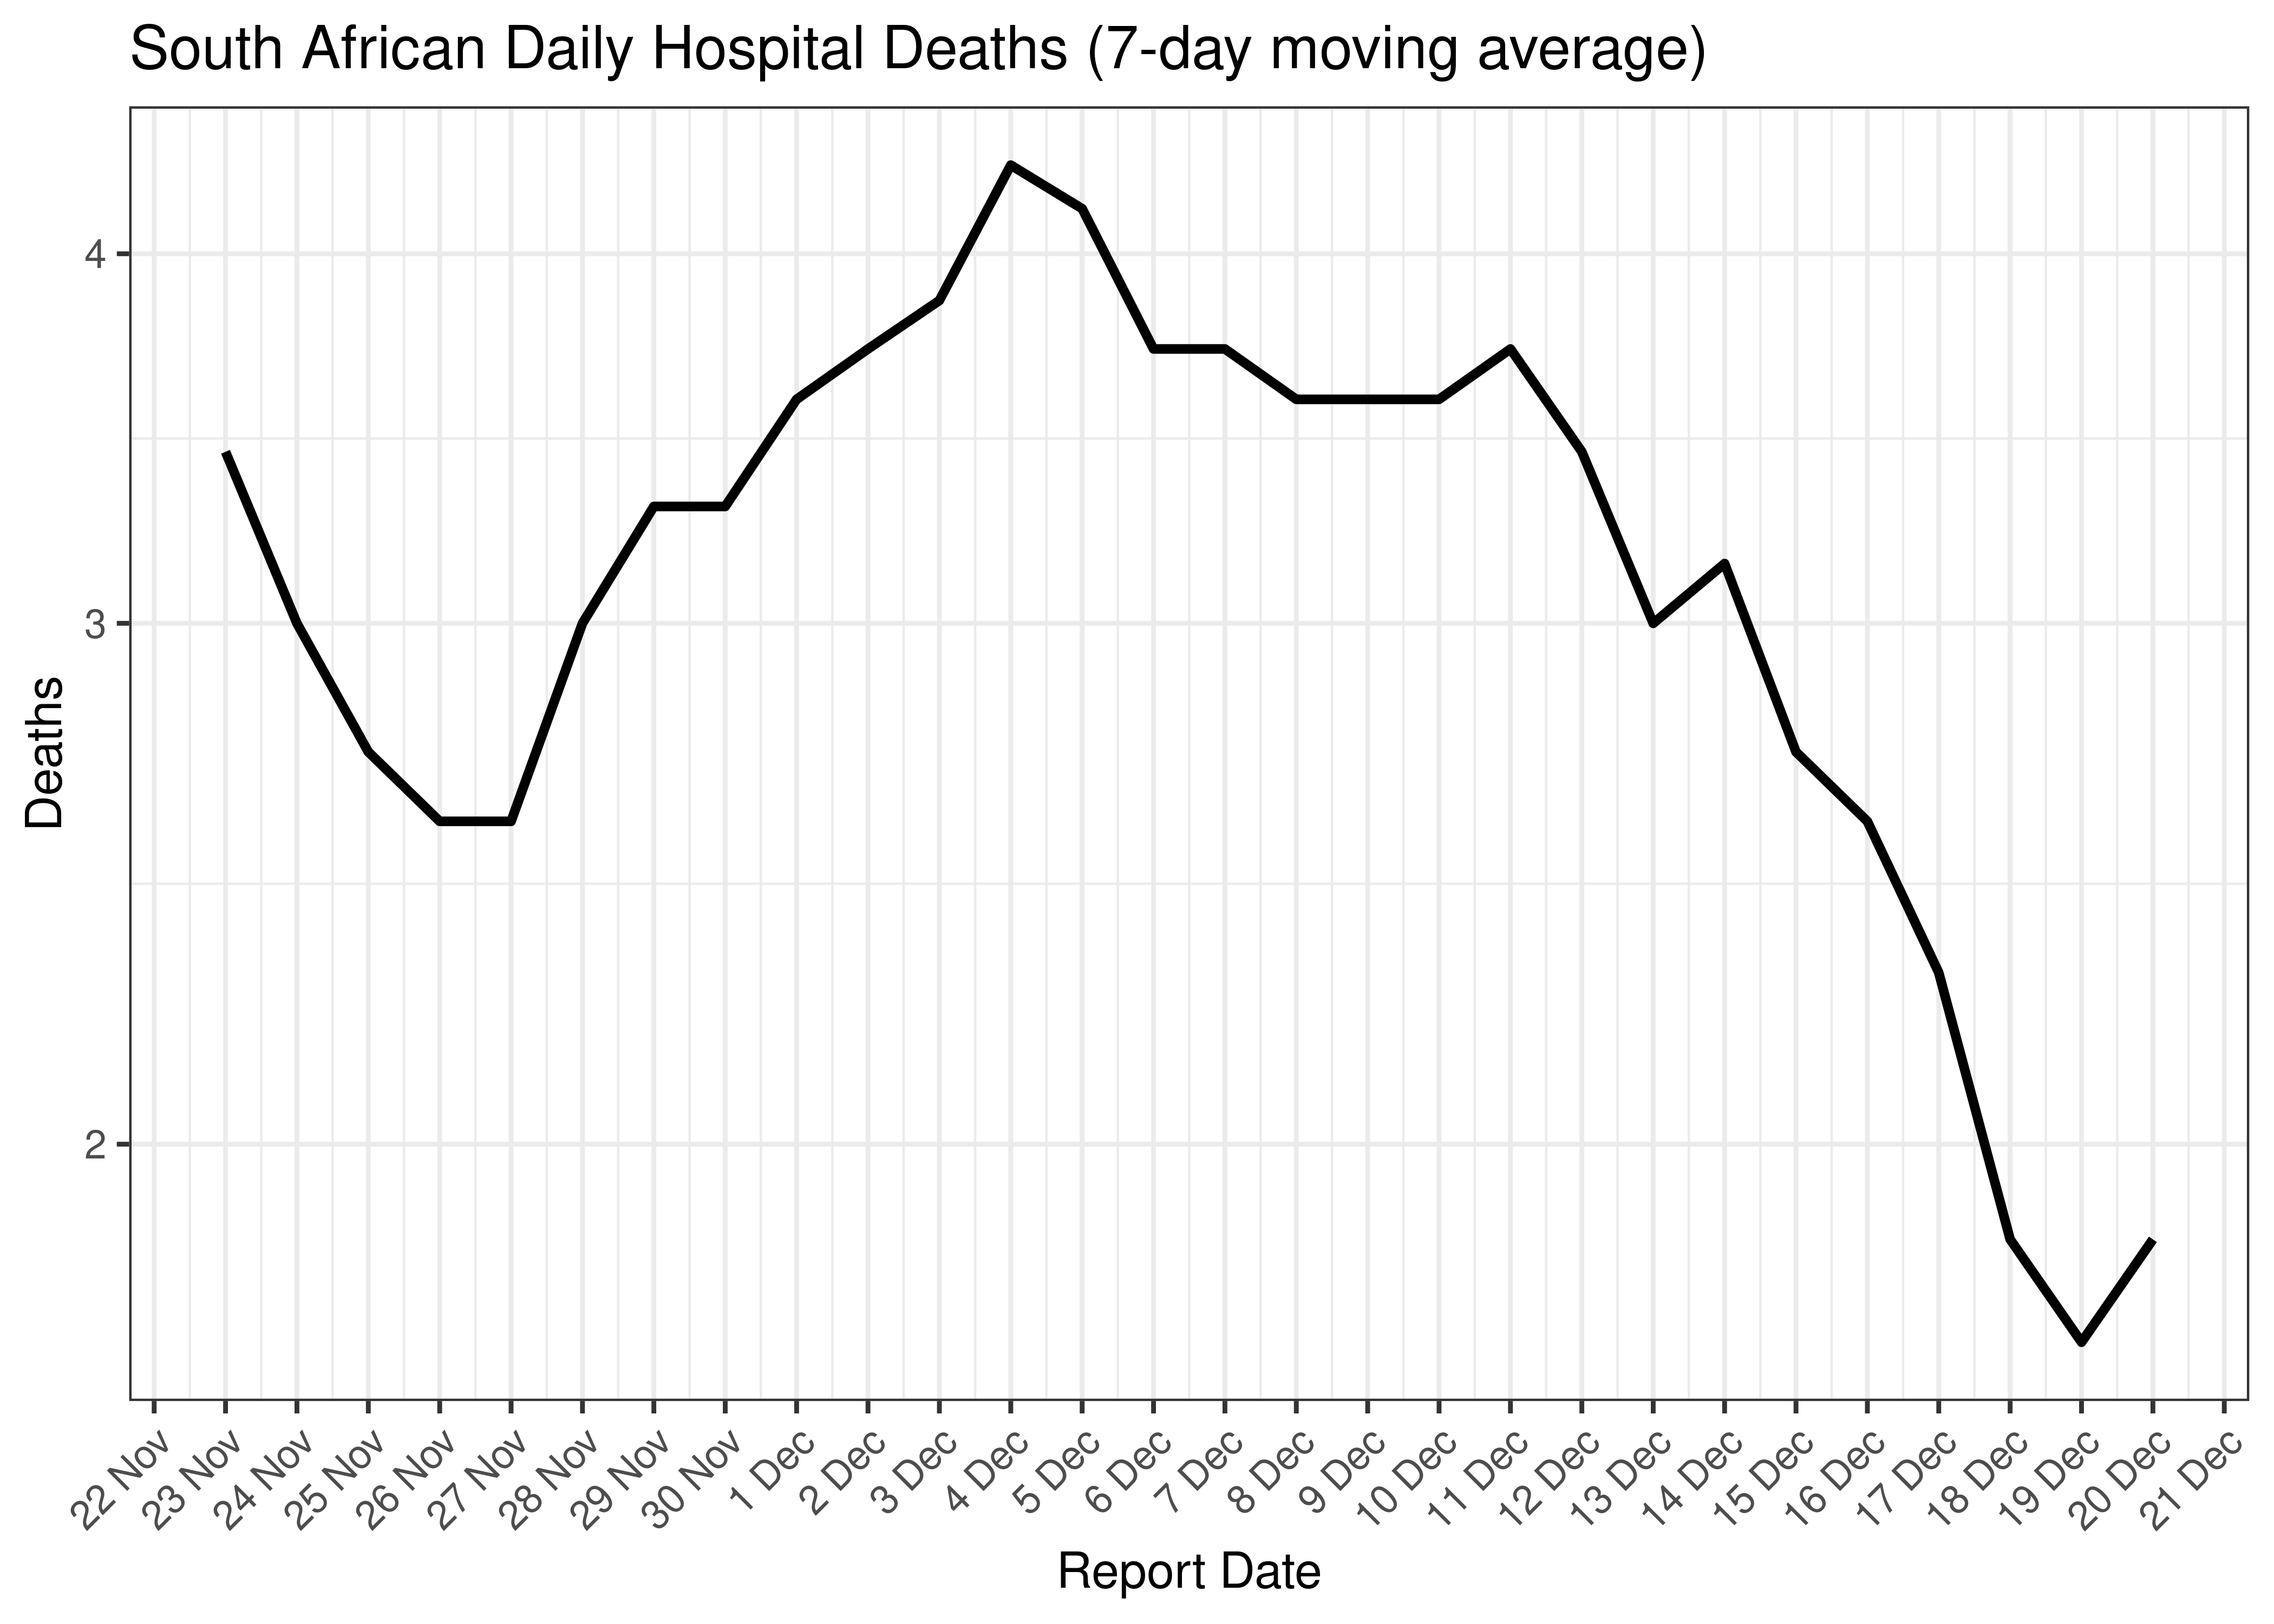 South African Daily Hospital Deaths for Last 30-days (7-day moving average)